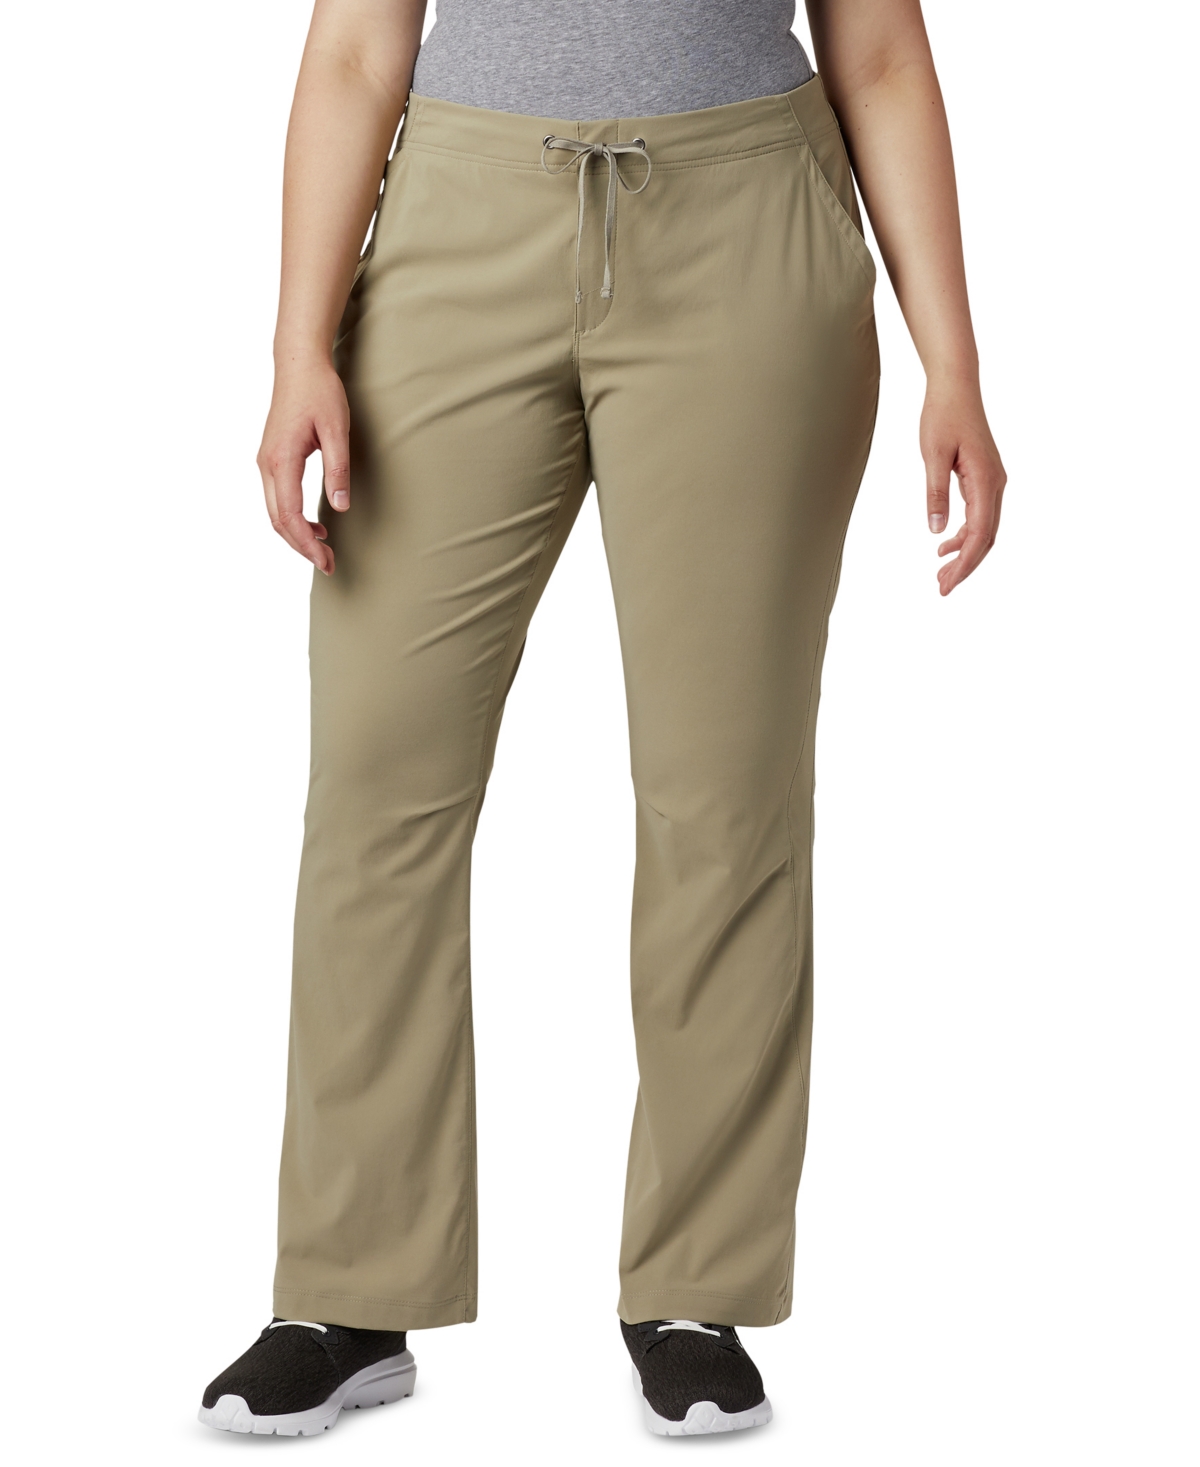 Plus Size Anytime Outdoor Bootcut Pants - Tusk